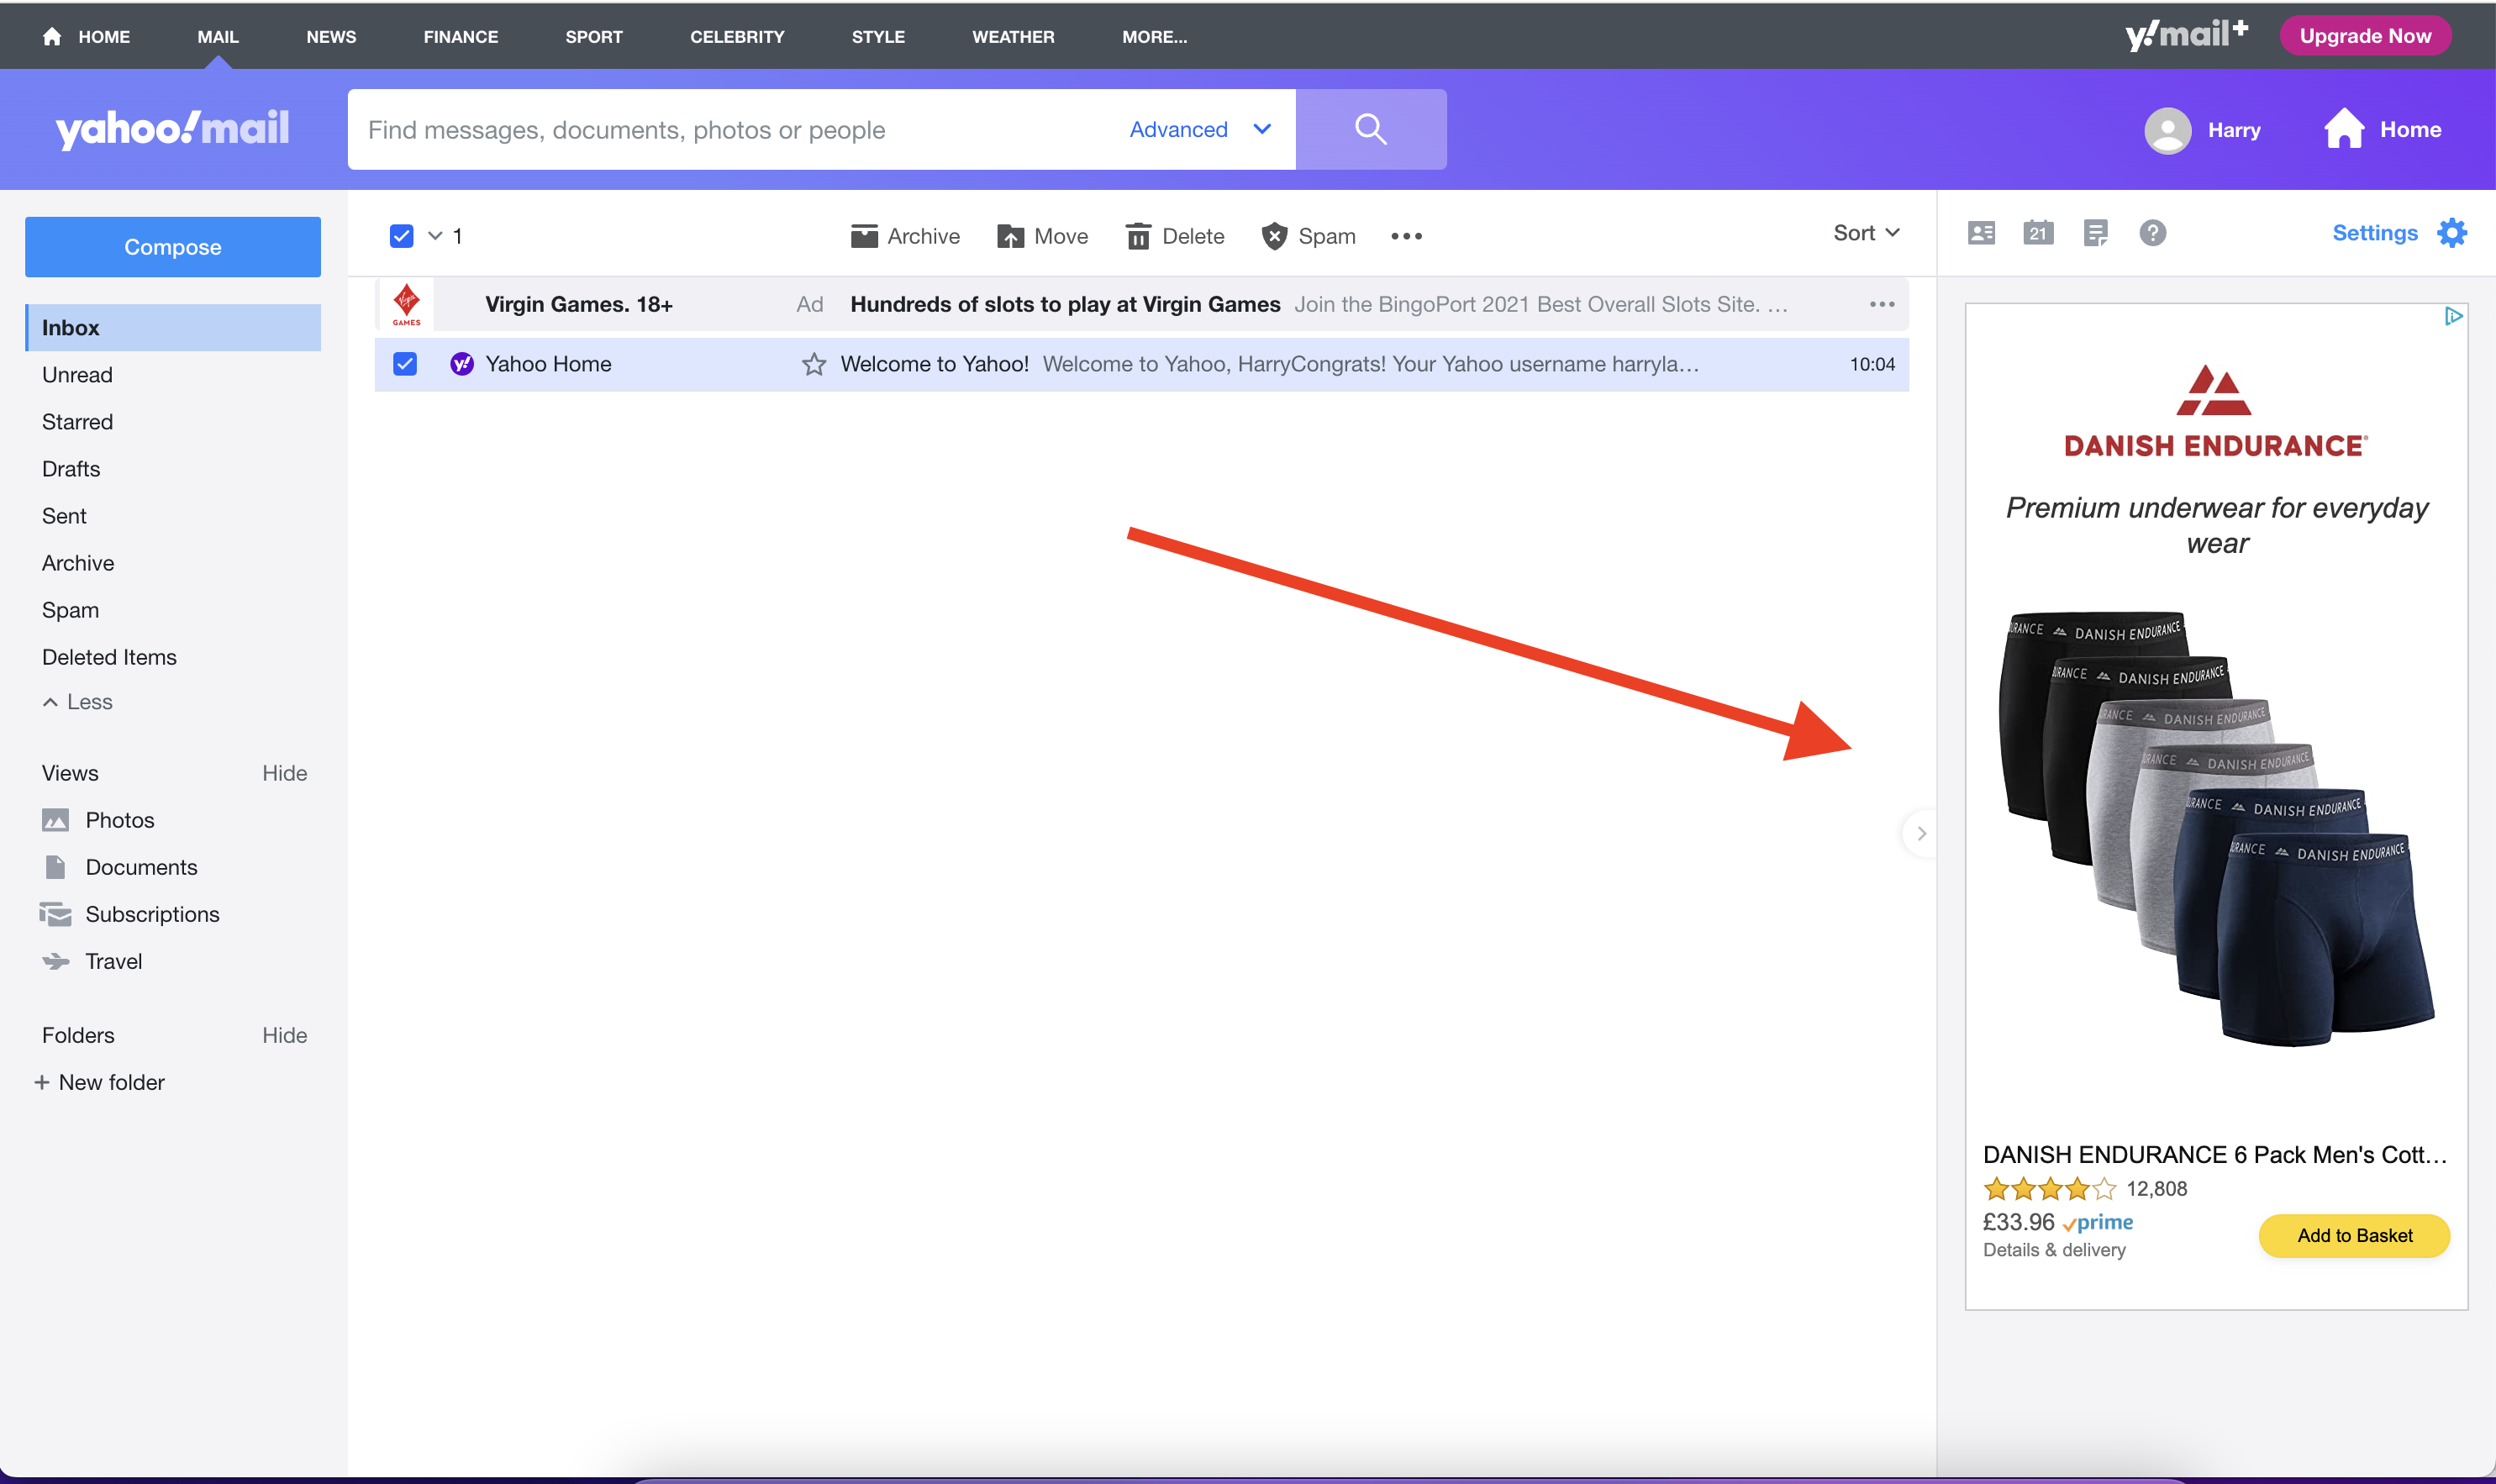 Yahoo vs Gmail: Yahoo inbox preview with ads